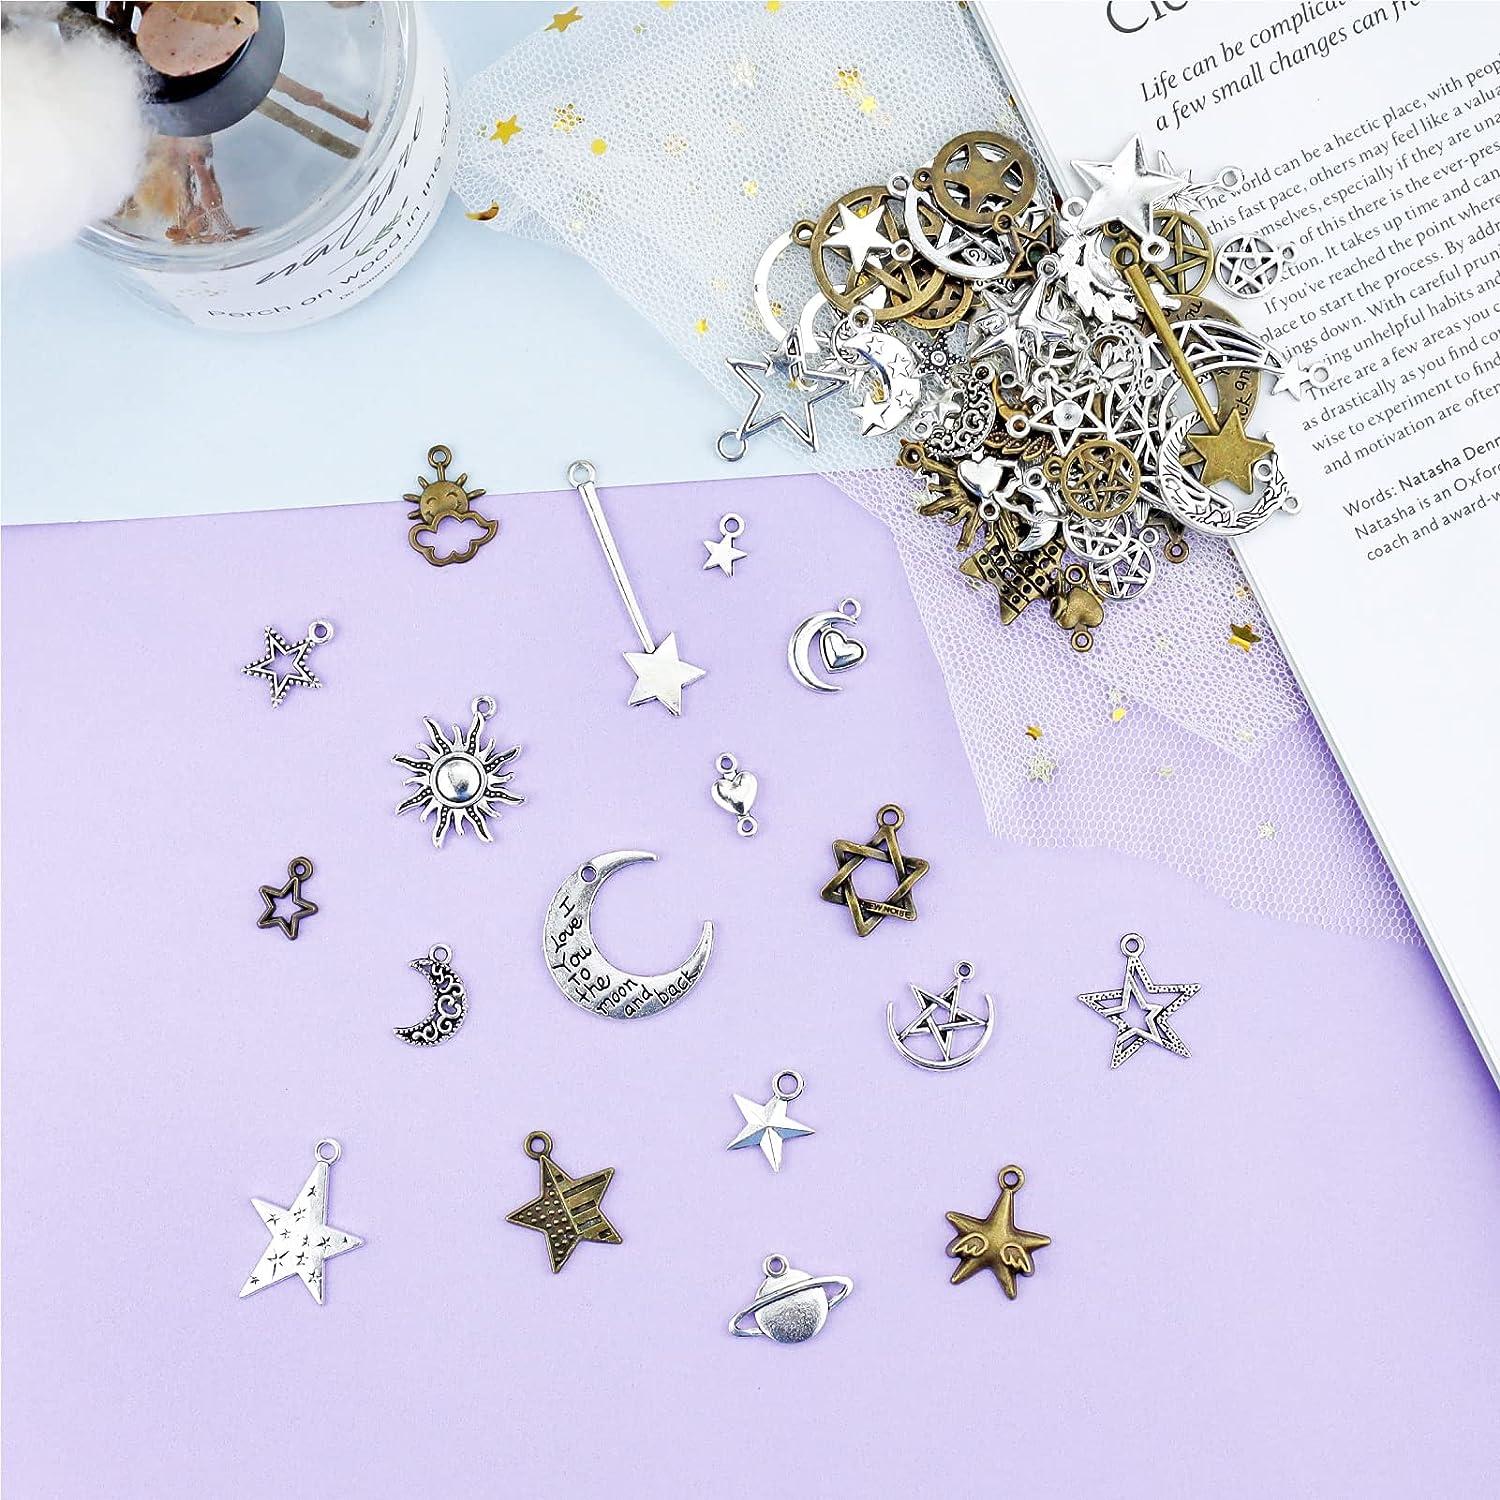 JIALEEY Celestial Mixed Sun Moon Star Charms Wholesale Bulk Lots Antique  Alloy Charms Pendants DIY for Necklace Bracelet Jewelry Making and Crafting  100g(74PCS)